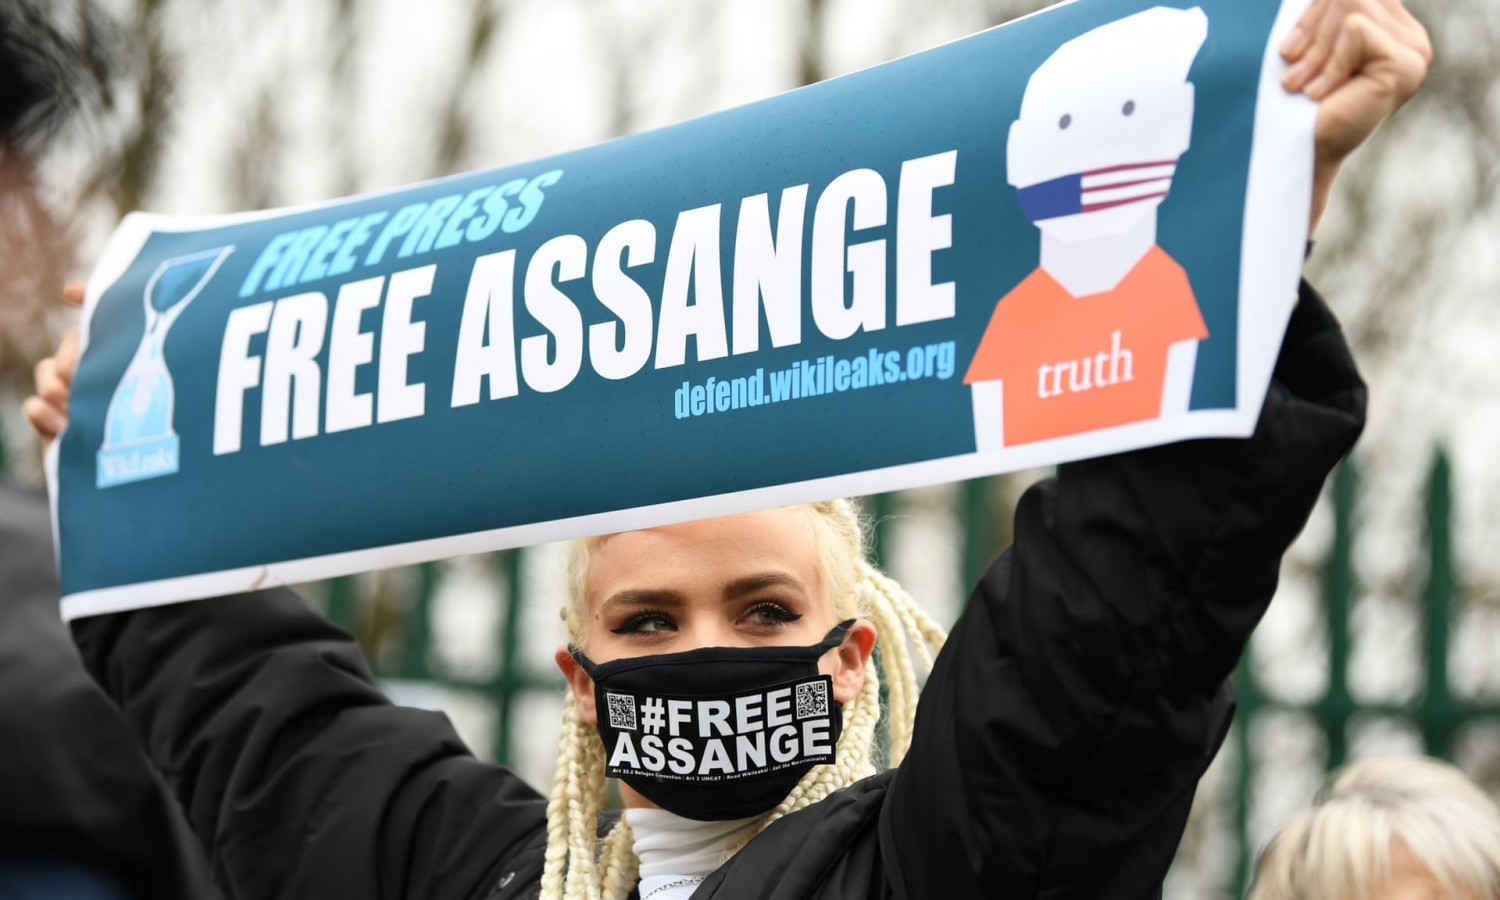 A supporter of Julian Assange protests outside Woolwich crown court in south-east London on Monday. Photograph: Daniel Leal-Olivas/AFP via Getty Images